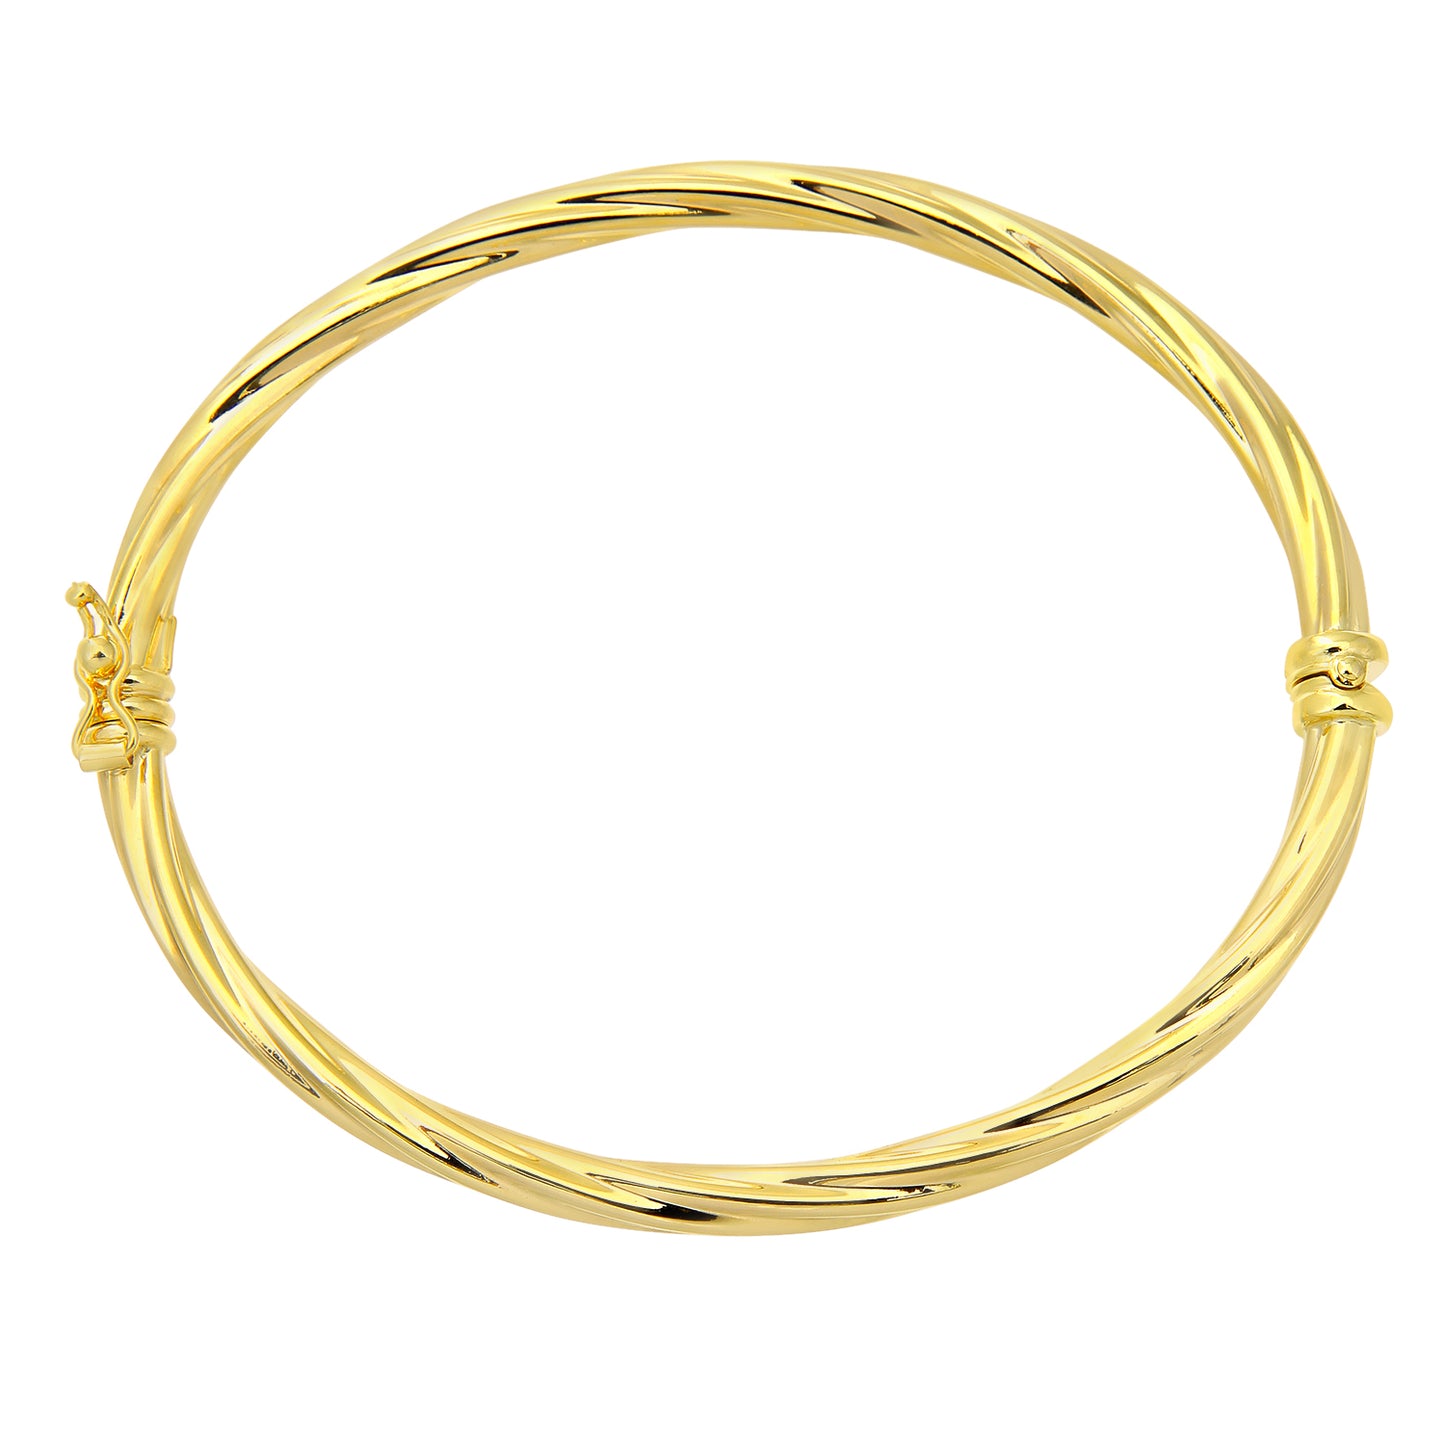 9ct Gold  Round Tube Candy Twist Bangle Bracelet 3mm - BNGAXL1502Y